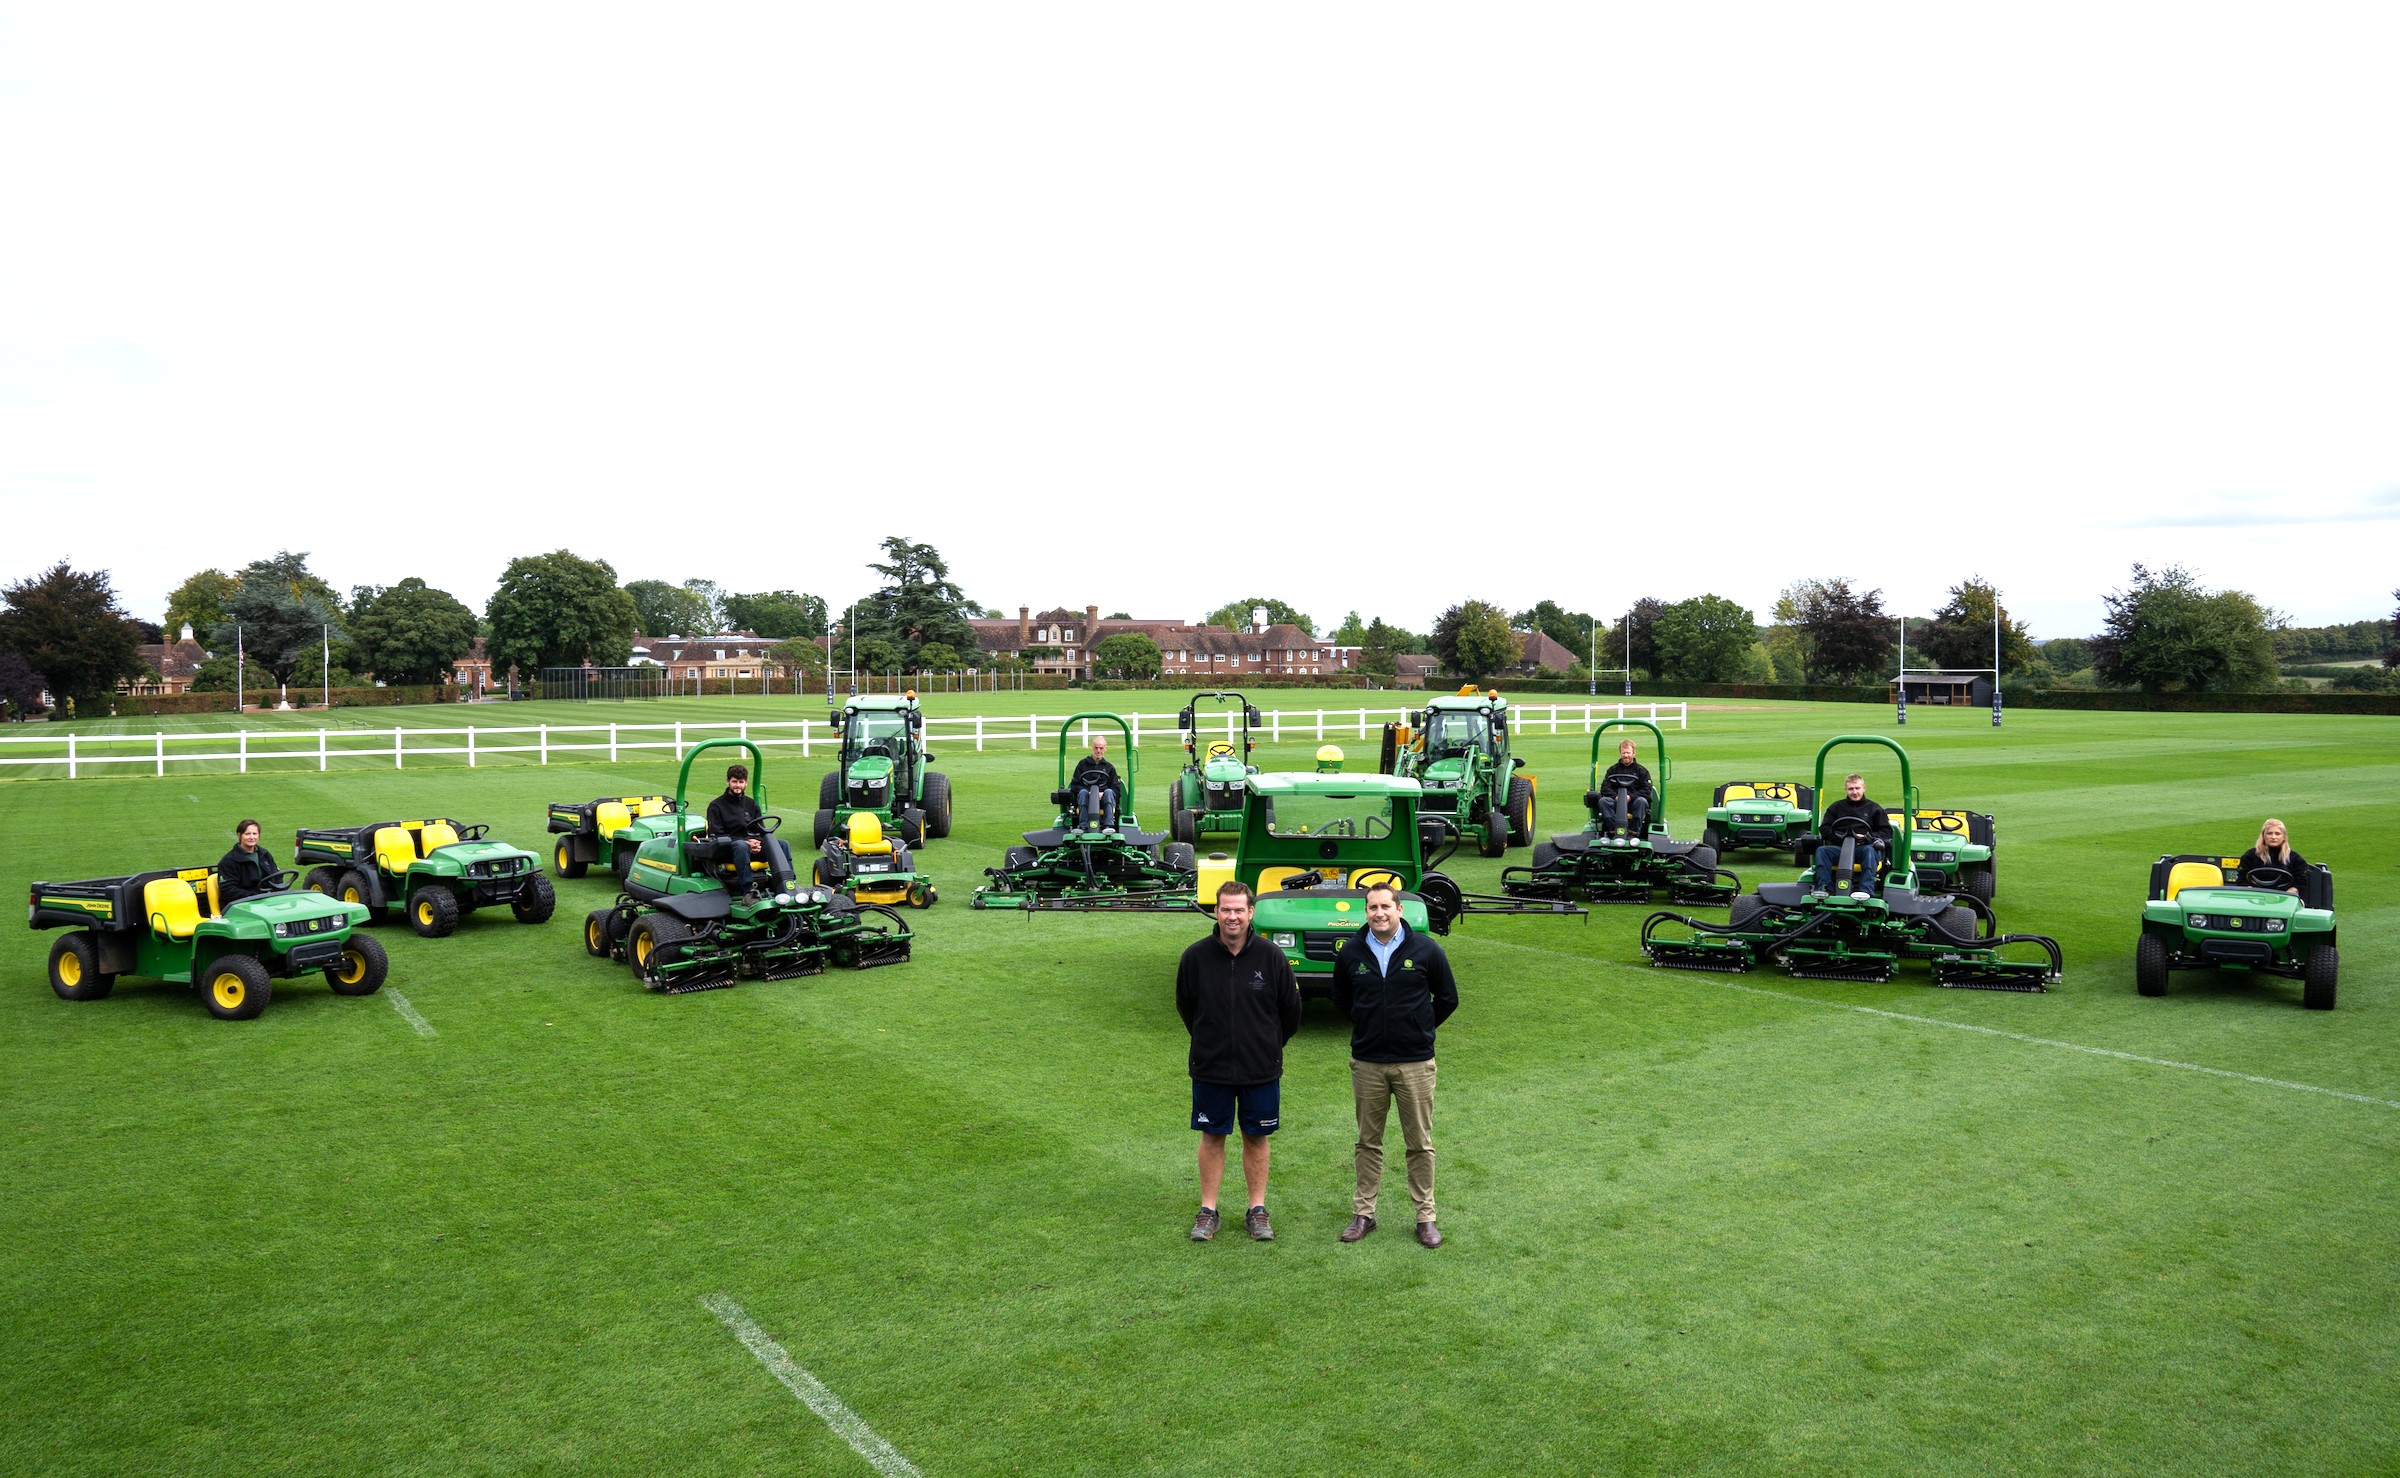 Forward-thinking school invests in future with new John Deere turf machinery fleet